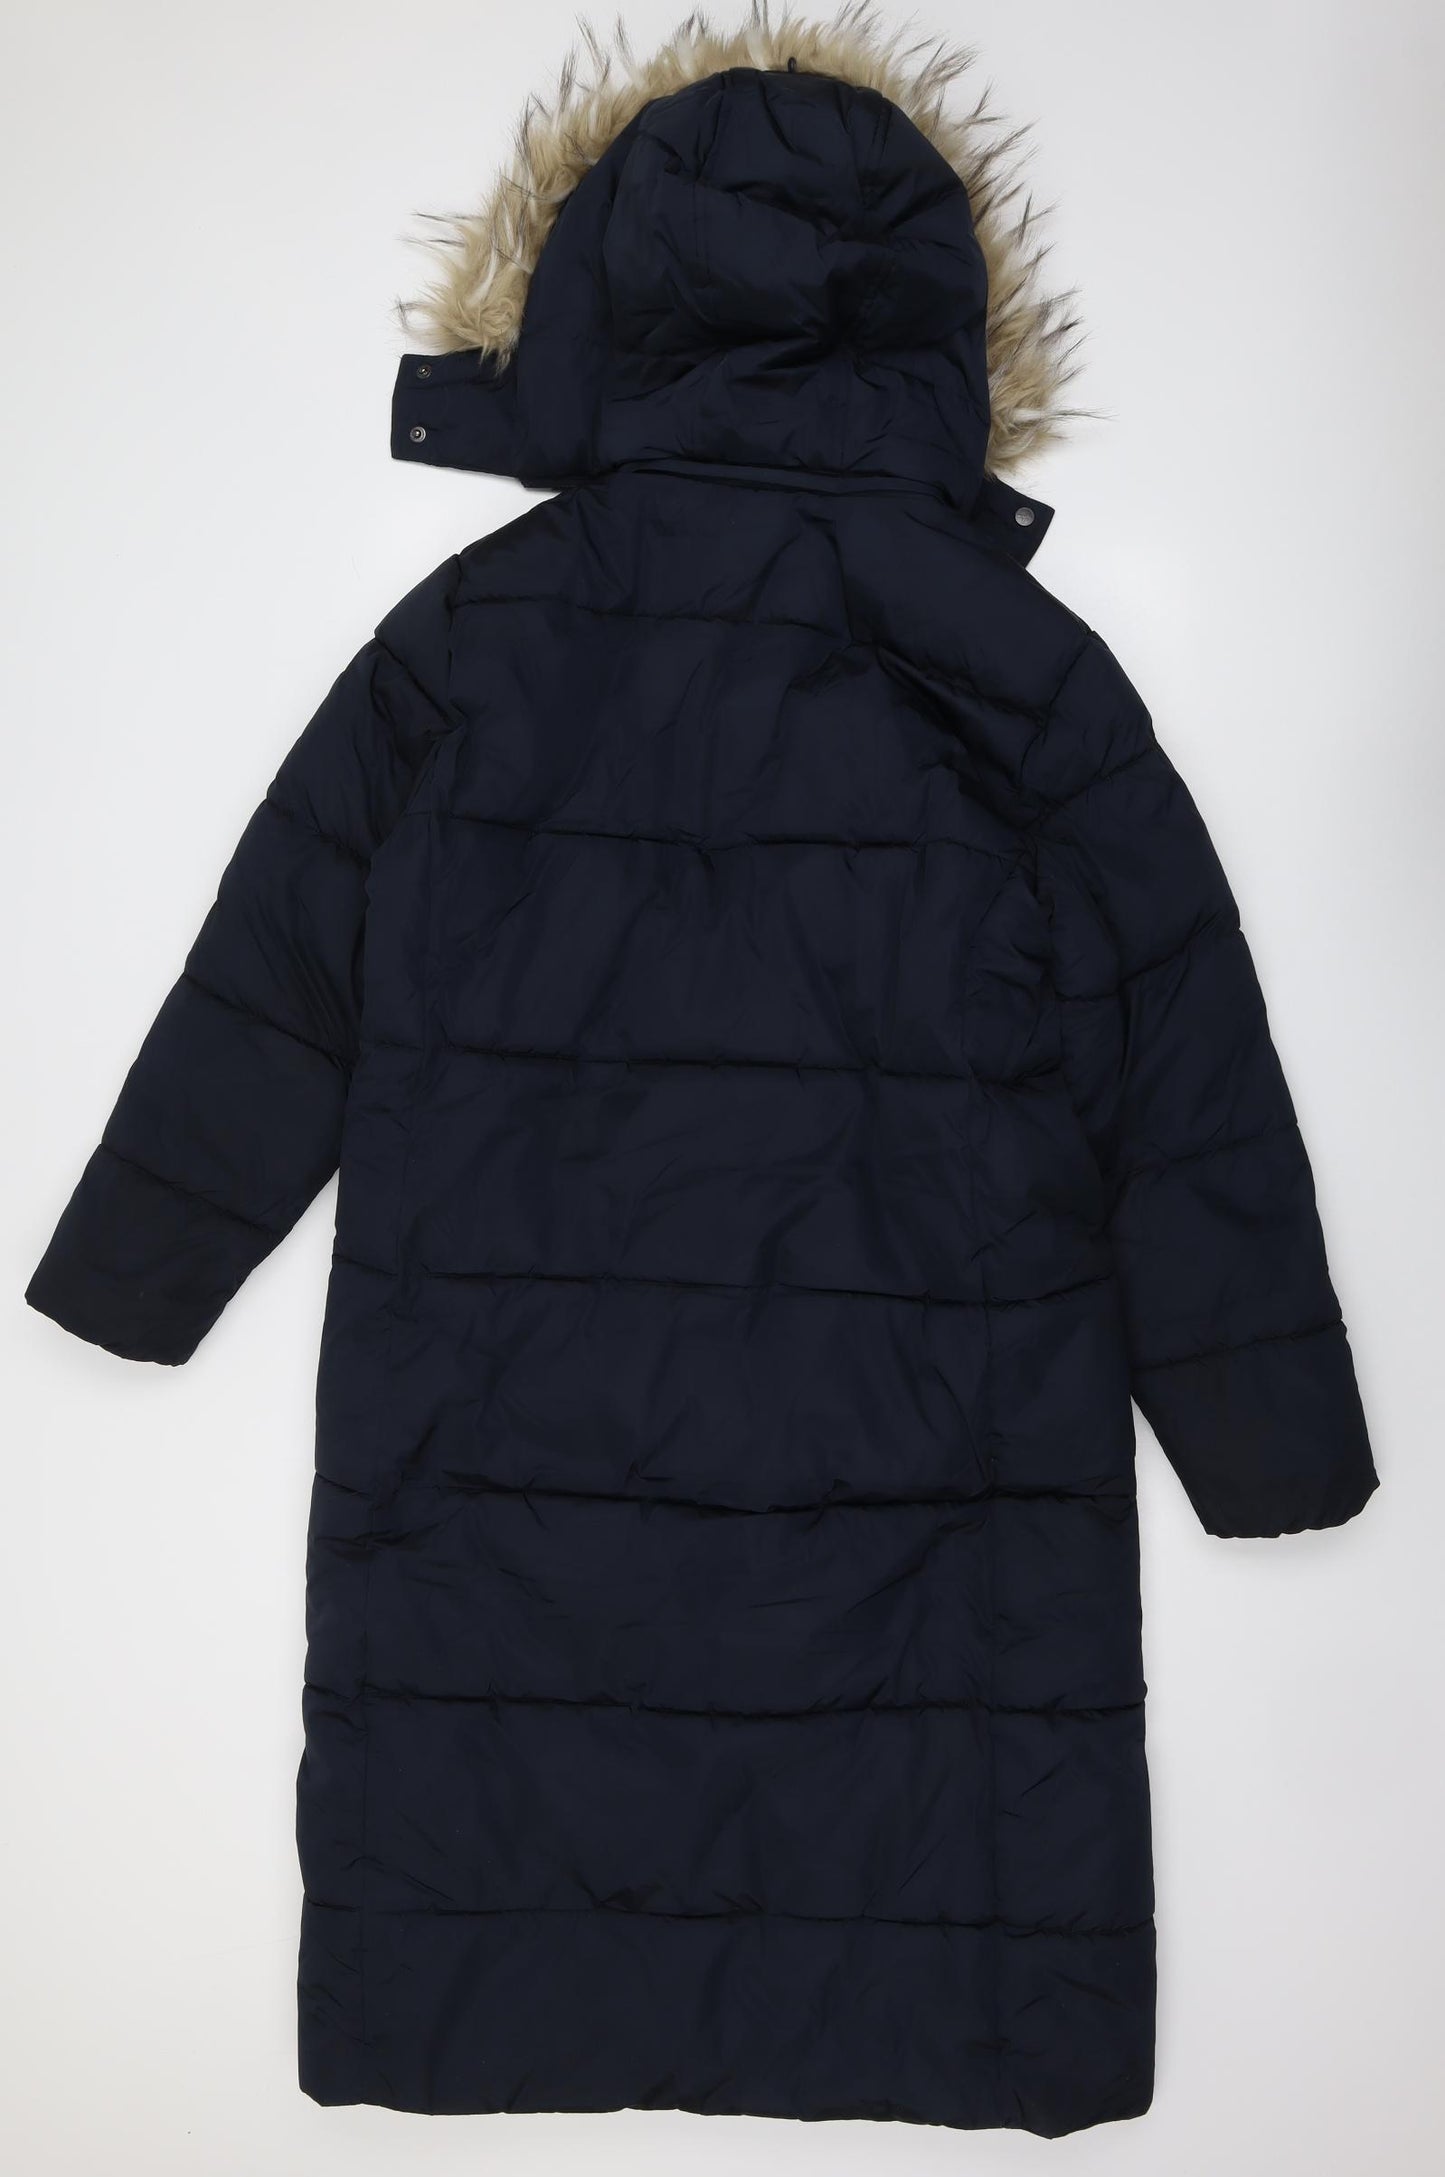 Crew Clothing Womens Blue Quilted Coat Size 12 Zip